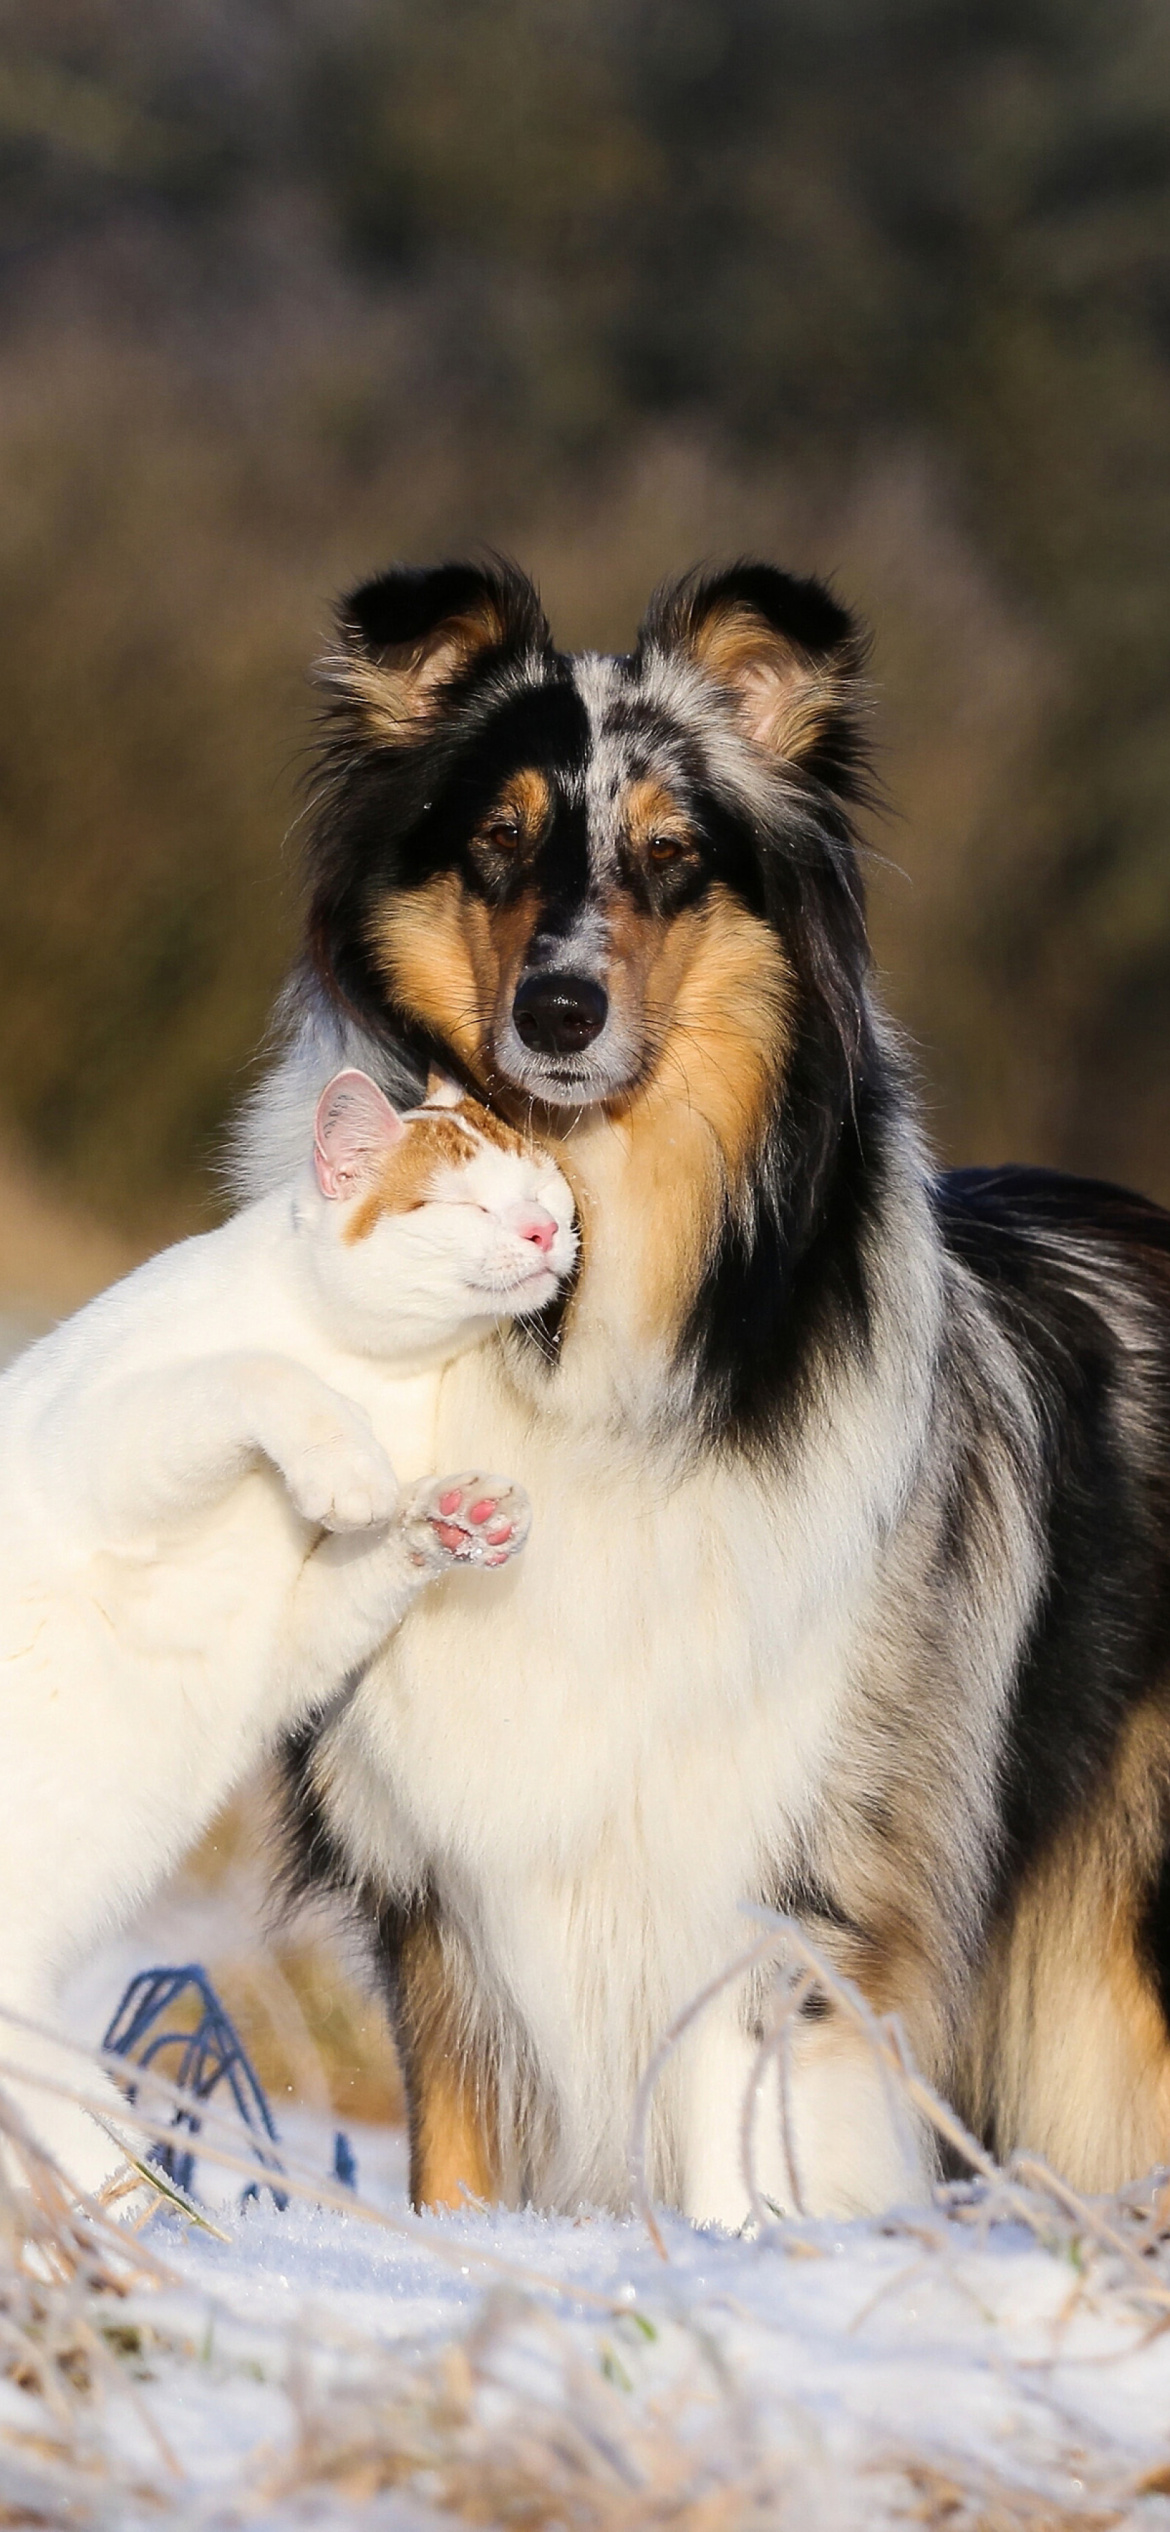 Friendship Cat and Dog Collie wallpaper 1170x2532